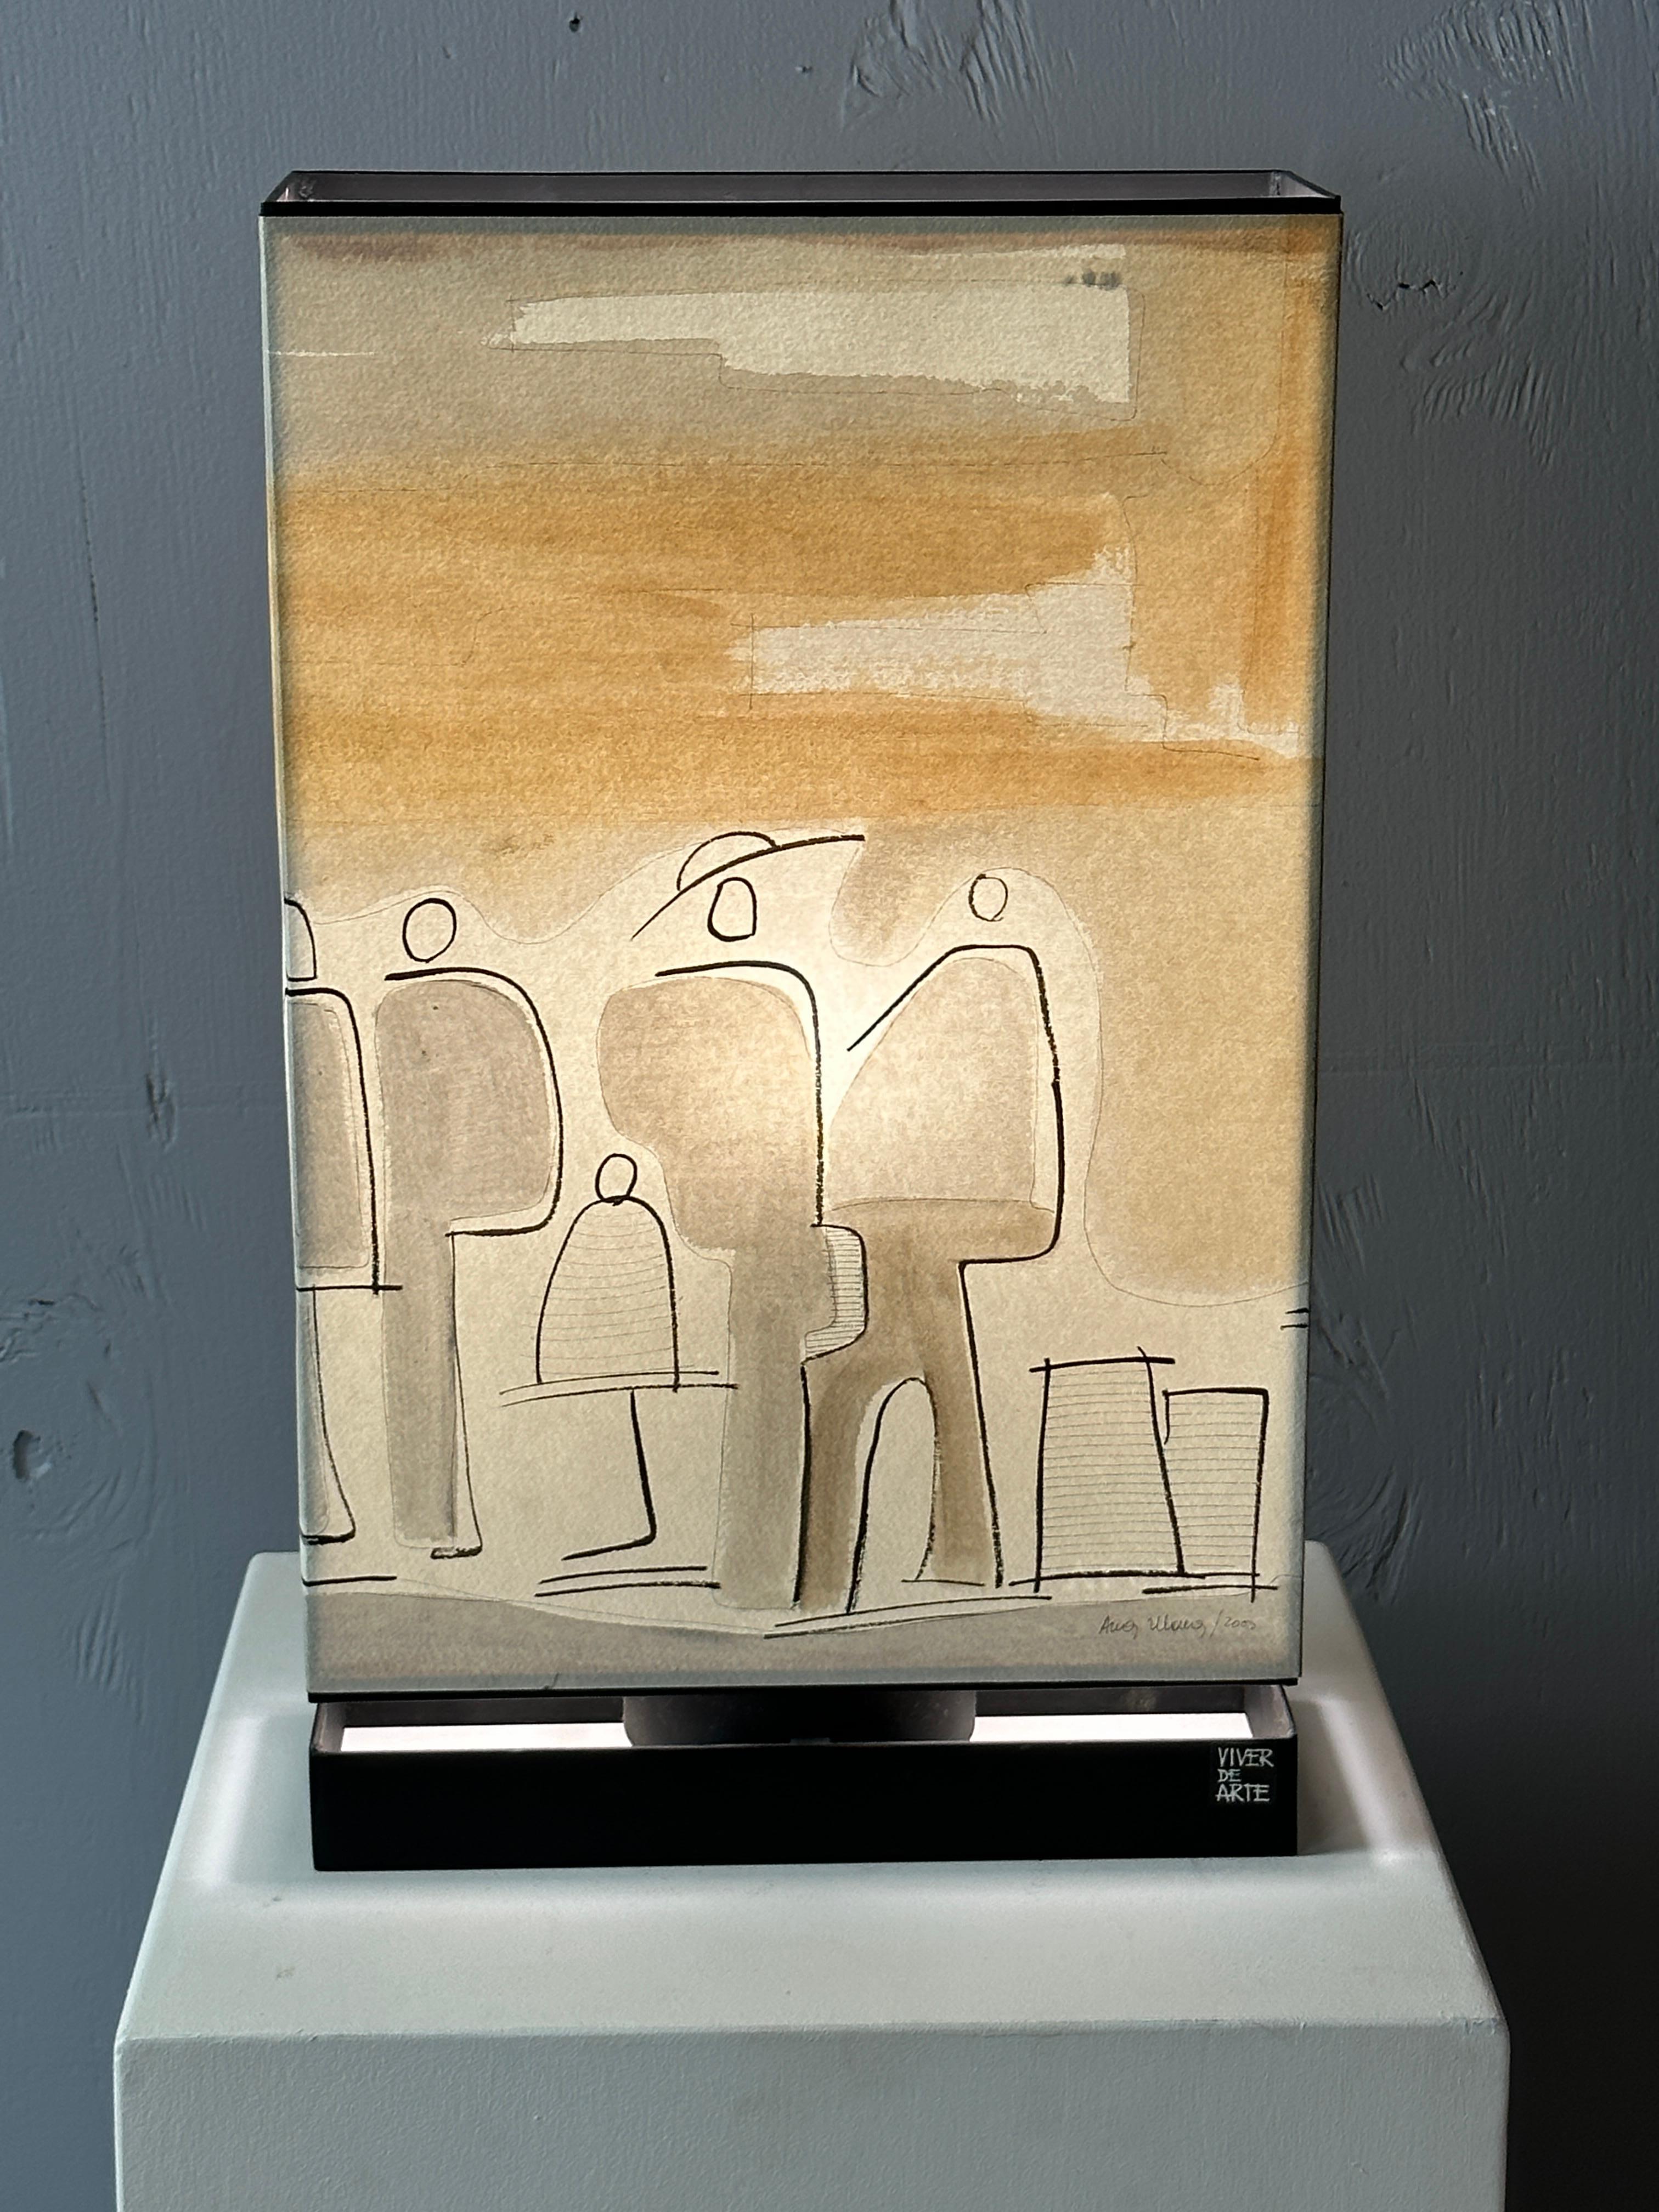 This lamp is the result of a fusion of materials and creativity.
It is placed on a sleek black metal base in a rectangular block held by a delicate metal frame. Its lampshade is a parchment composed of two painted sides; the technique is reminiscent